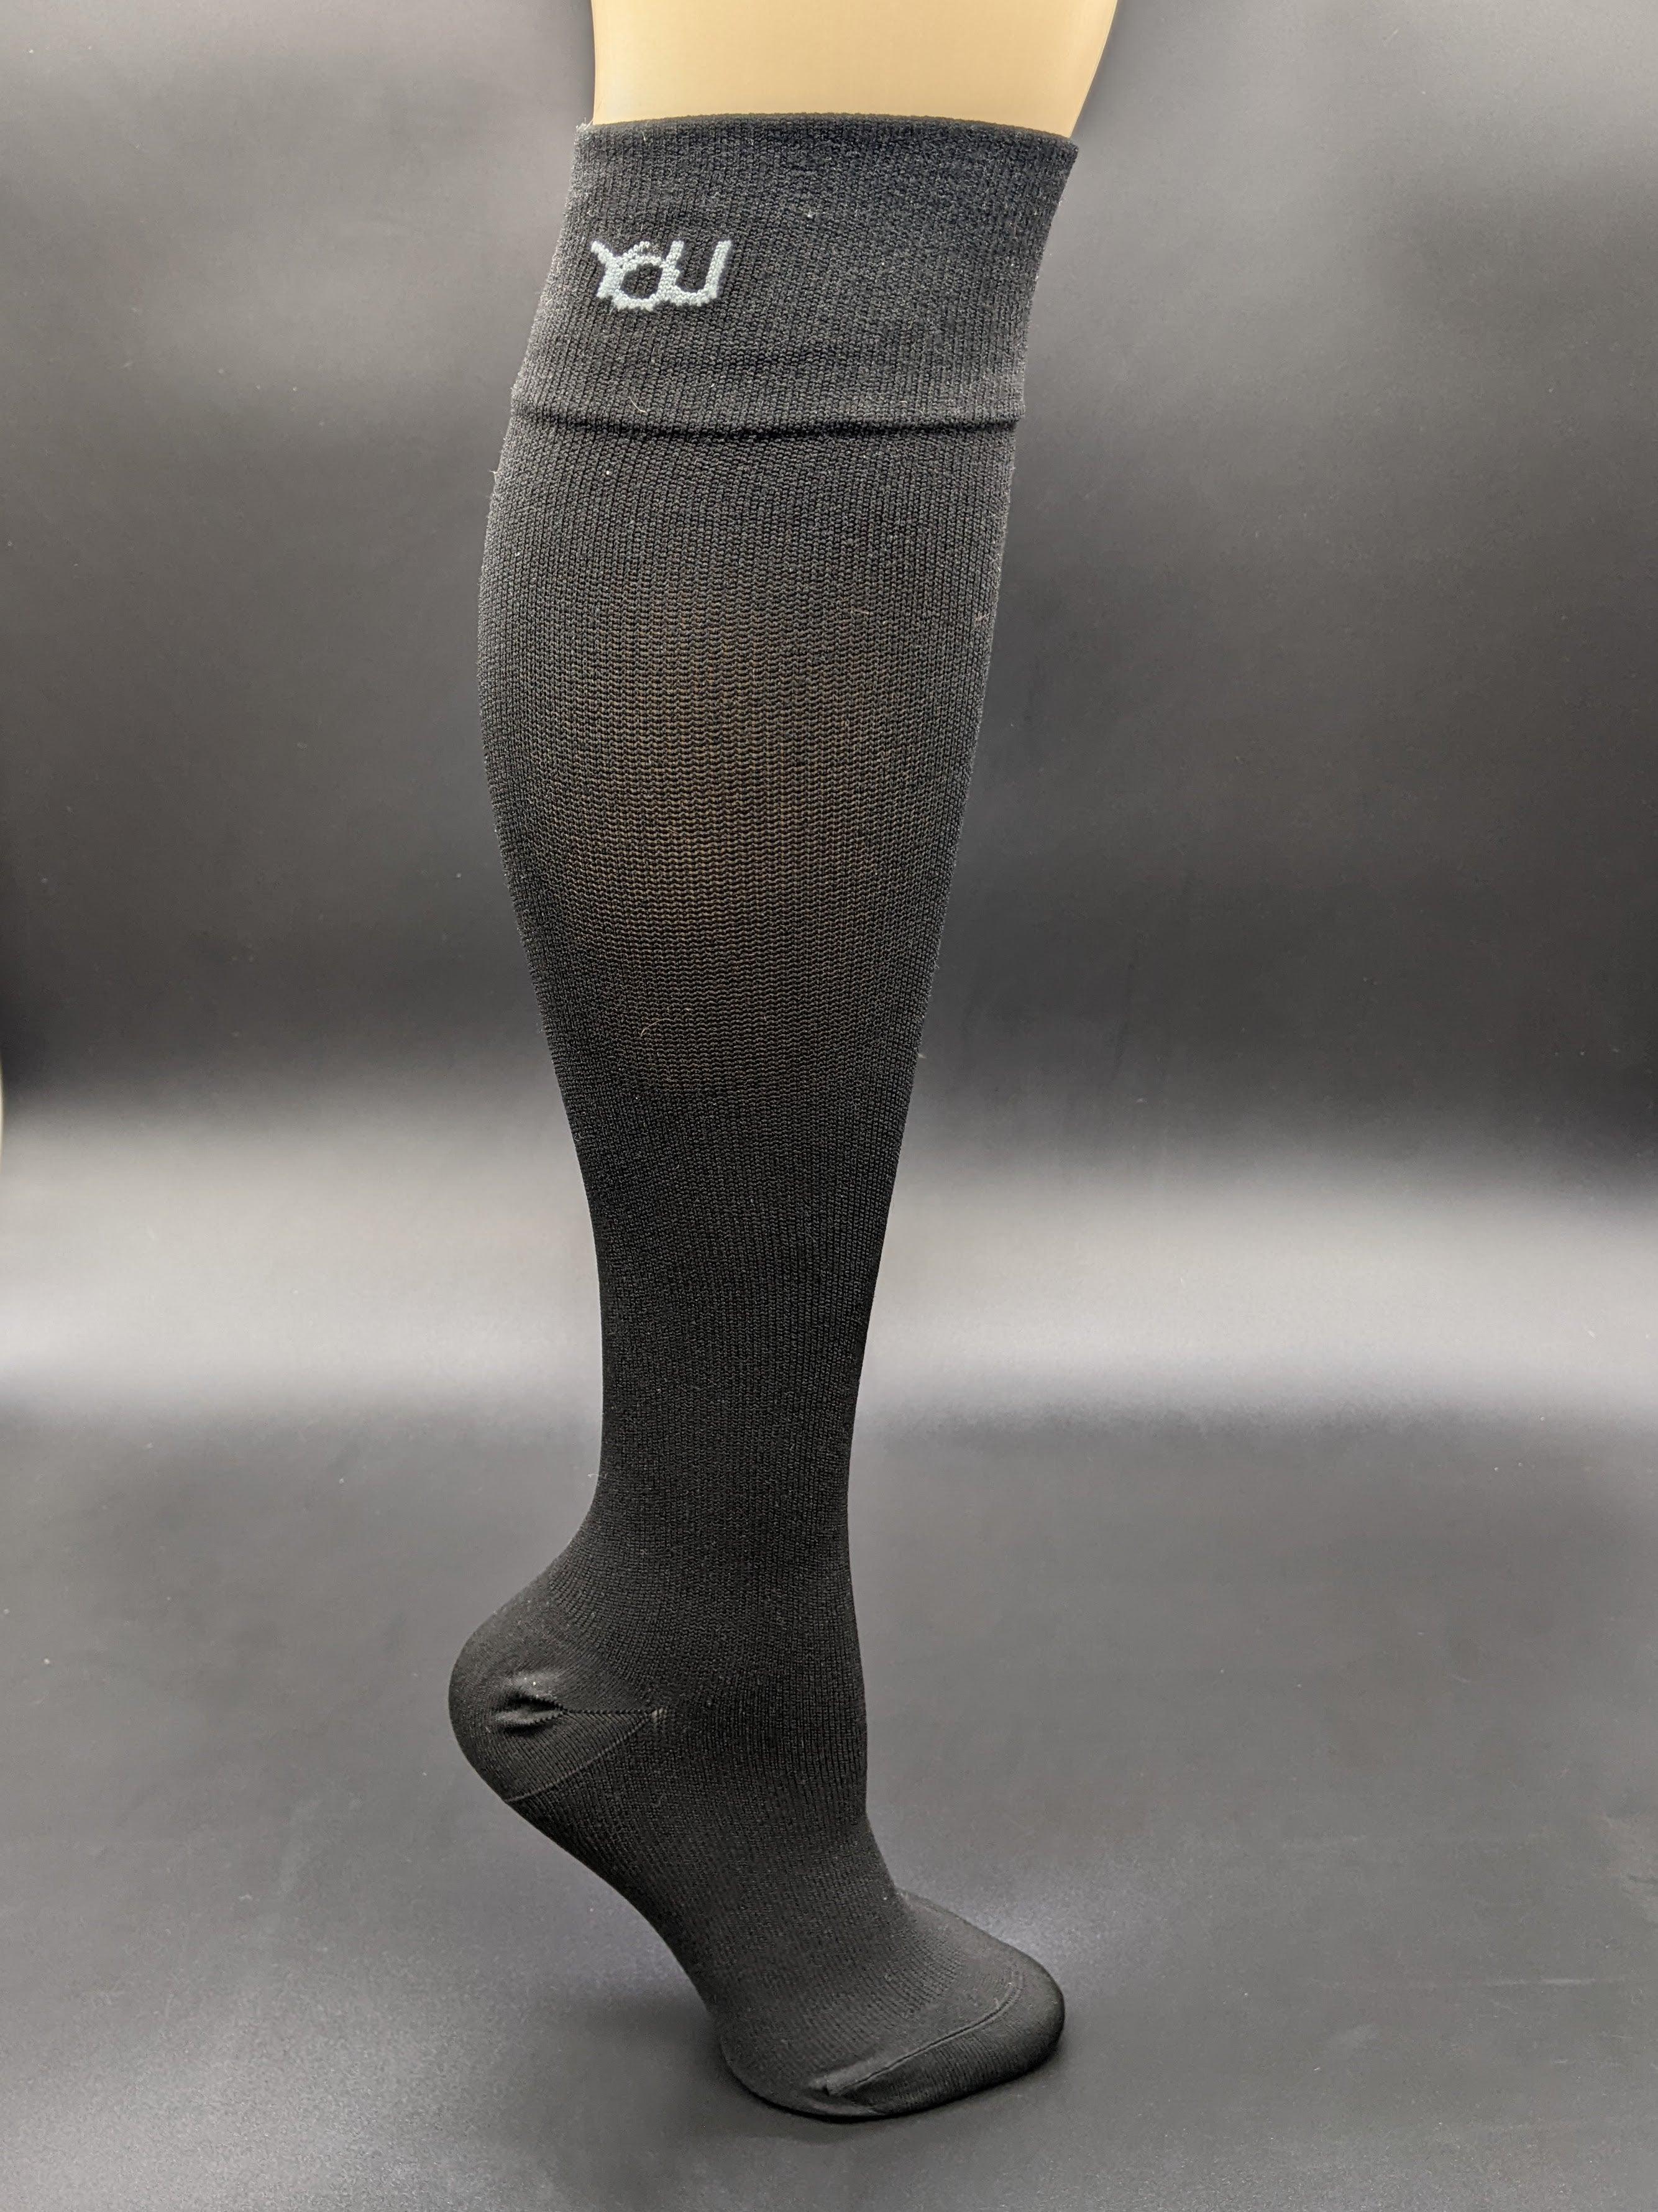 Medical Grade Compression Socks 20-30 mmHg - Knee High - 812K99-SBC Medical Grade Compression Socks 20-30 mmHg - Knee High - undefined by Supply Physical Therapy 20-30 mmhg, Compression socks